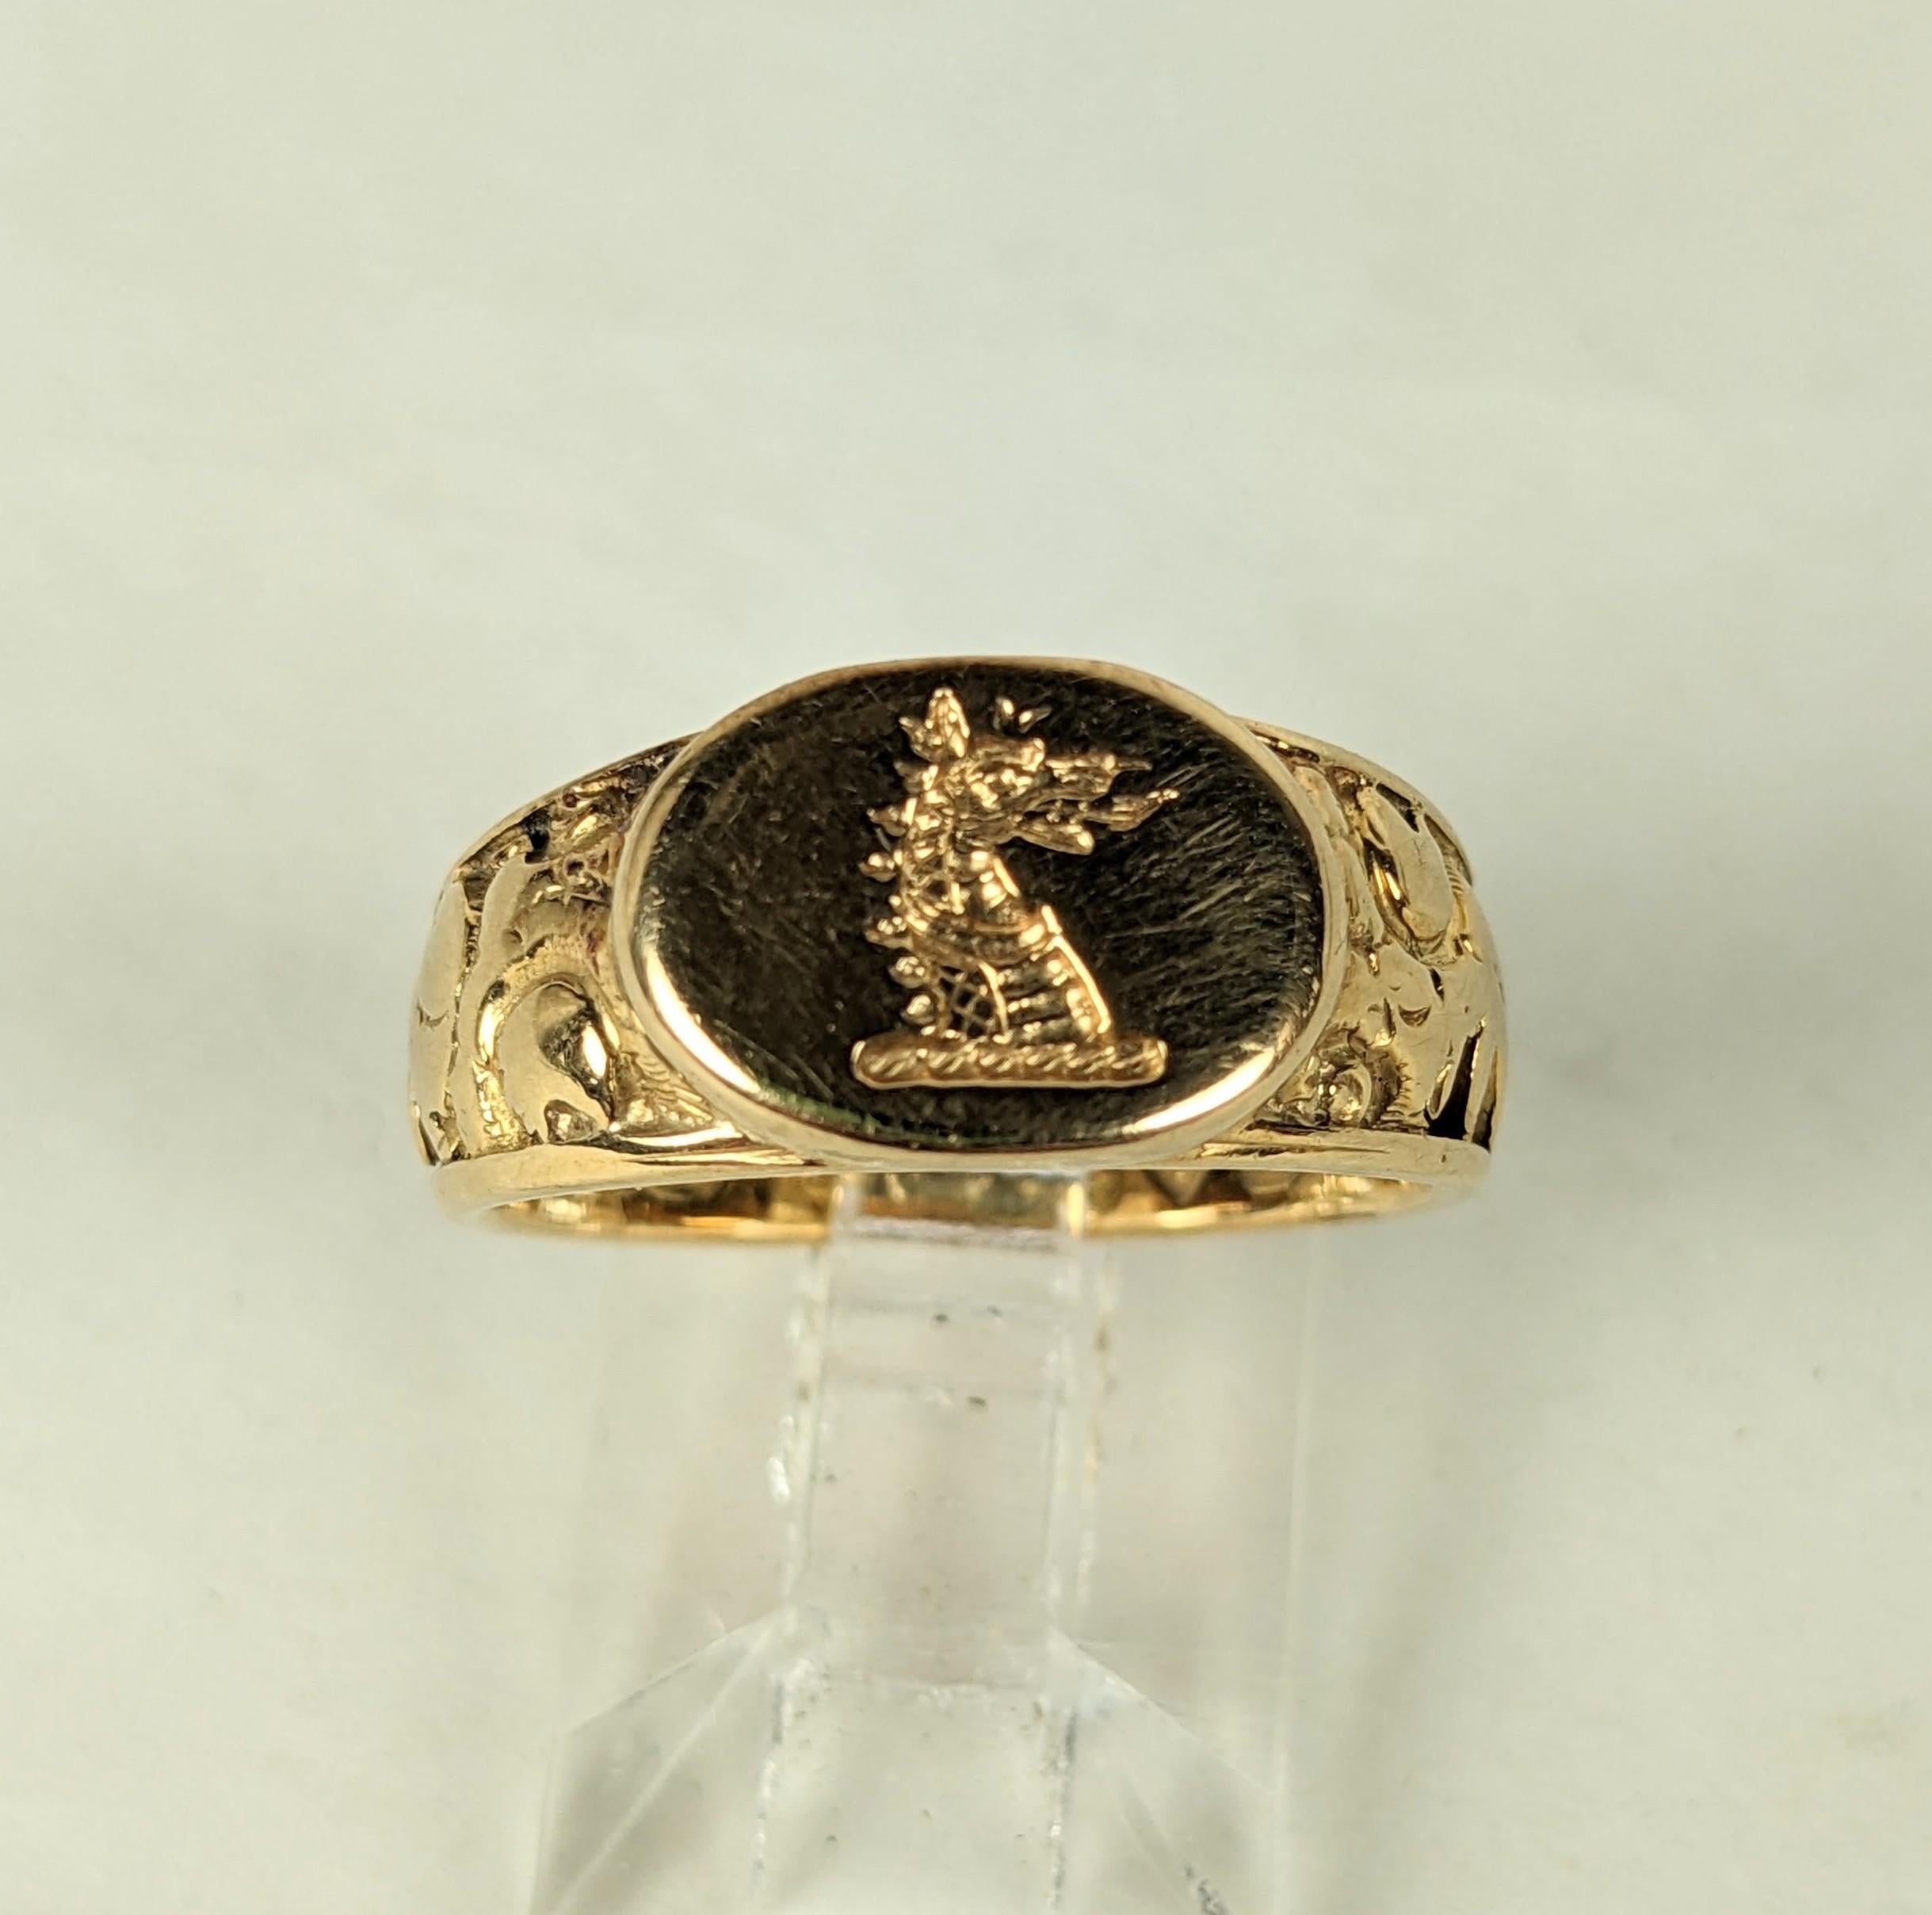 Elegant 18K English Dragon Signet Ring from the 1940's. Tapered band is decorated with repousse patterns with a central dragons head. Beautiful quality. UK. SIgned J.L., Date stamps for 1971 London.
Size 6 suitable for anyone. 